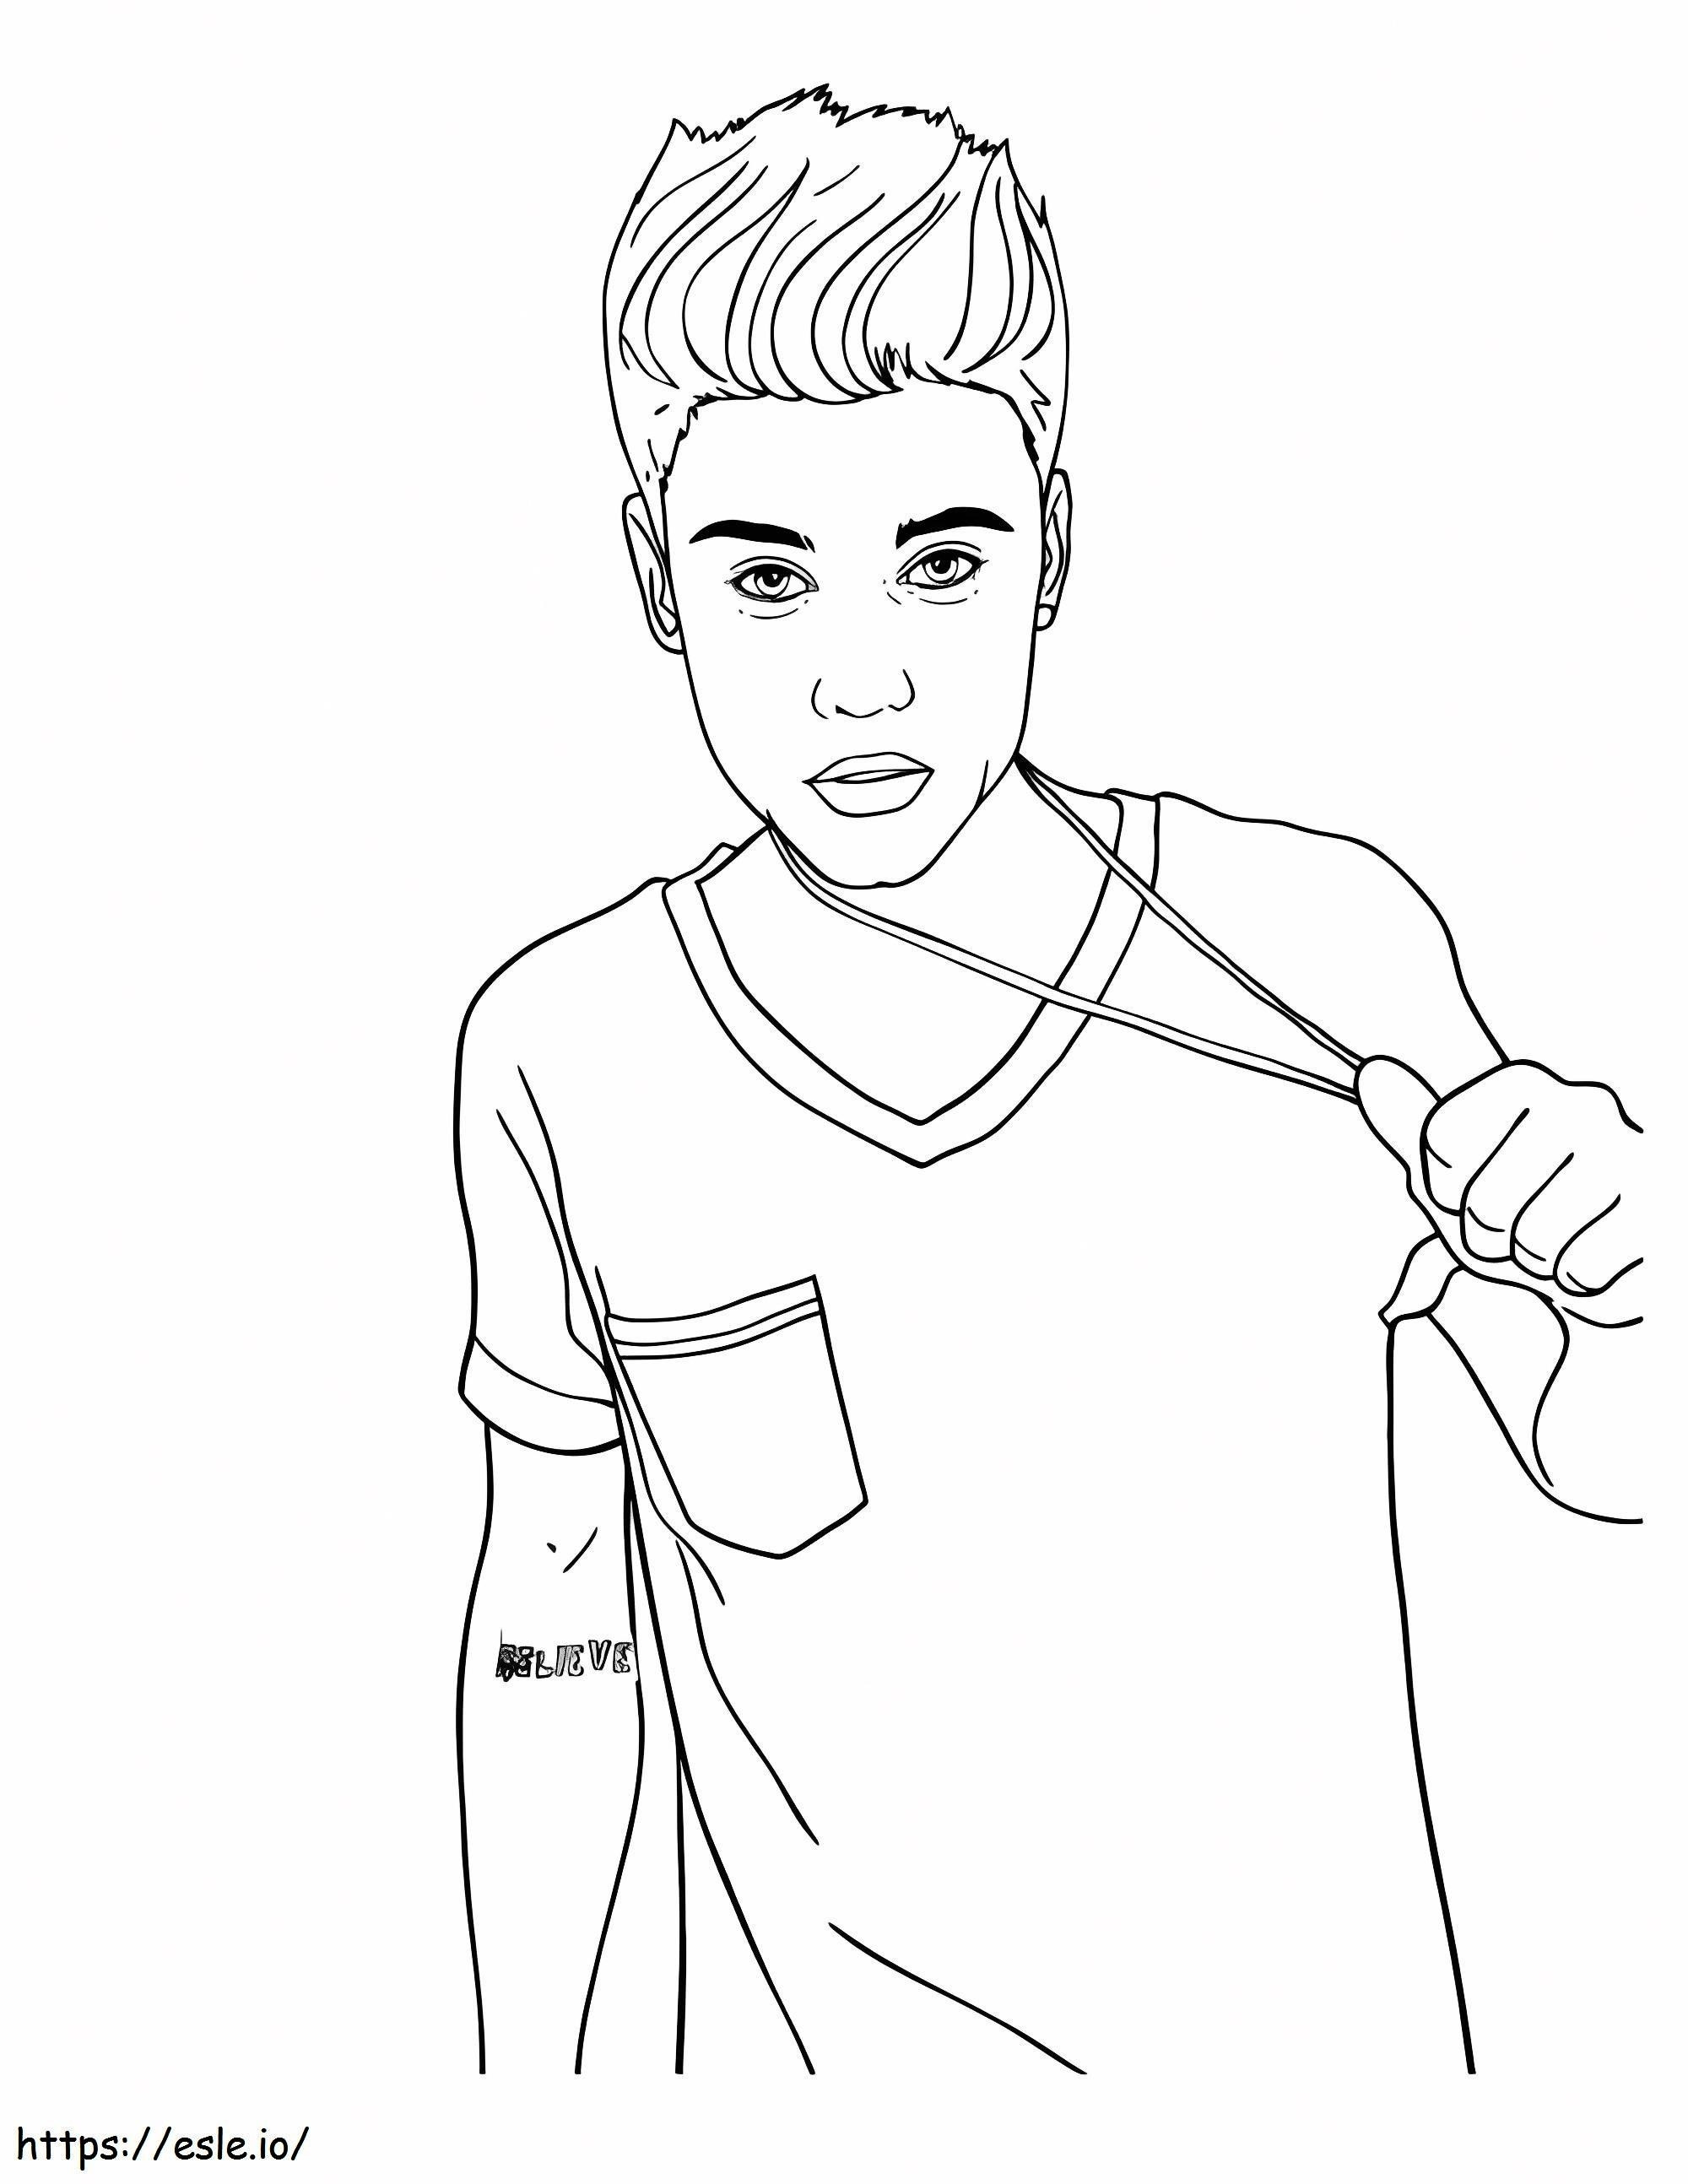 1541131491 Justin Bieber With Cool With Short Hair Style To Create Astounding Printable Justin Bieber 756 coloring page